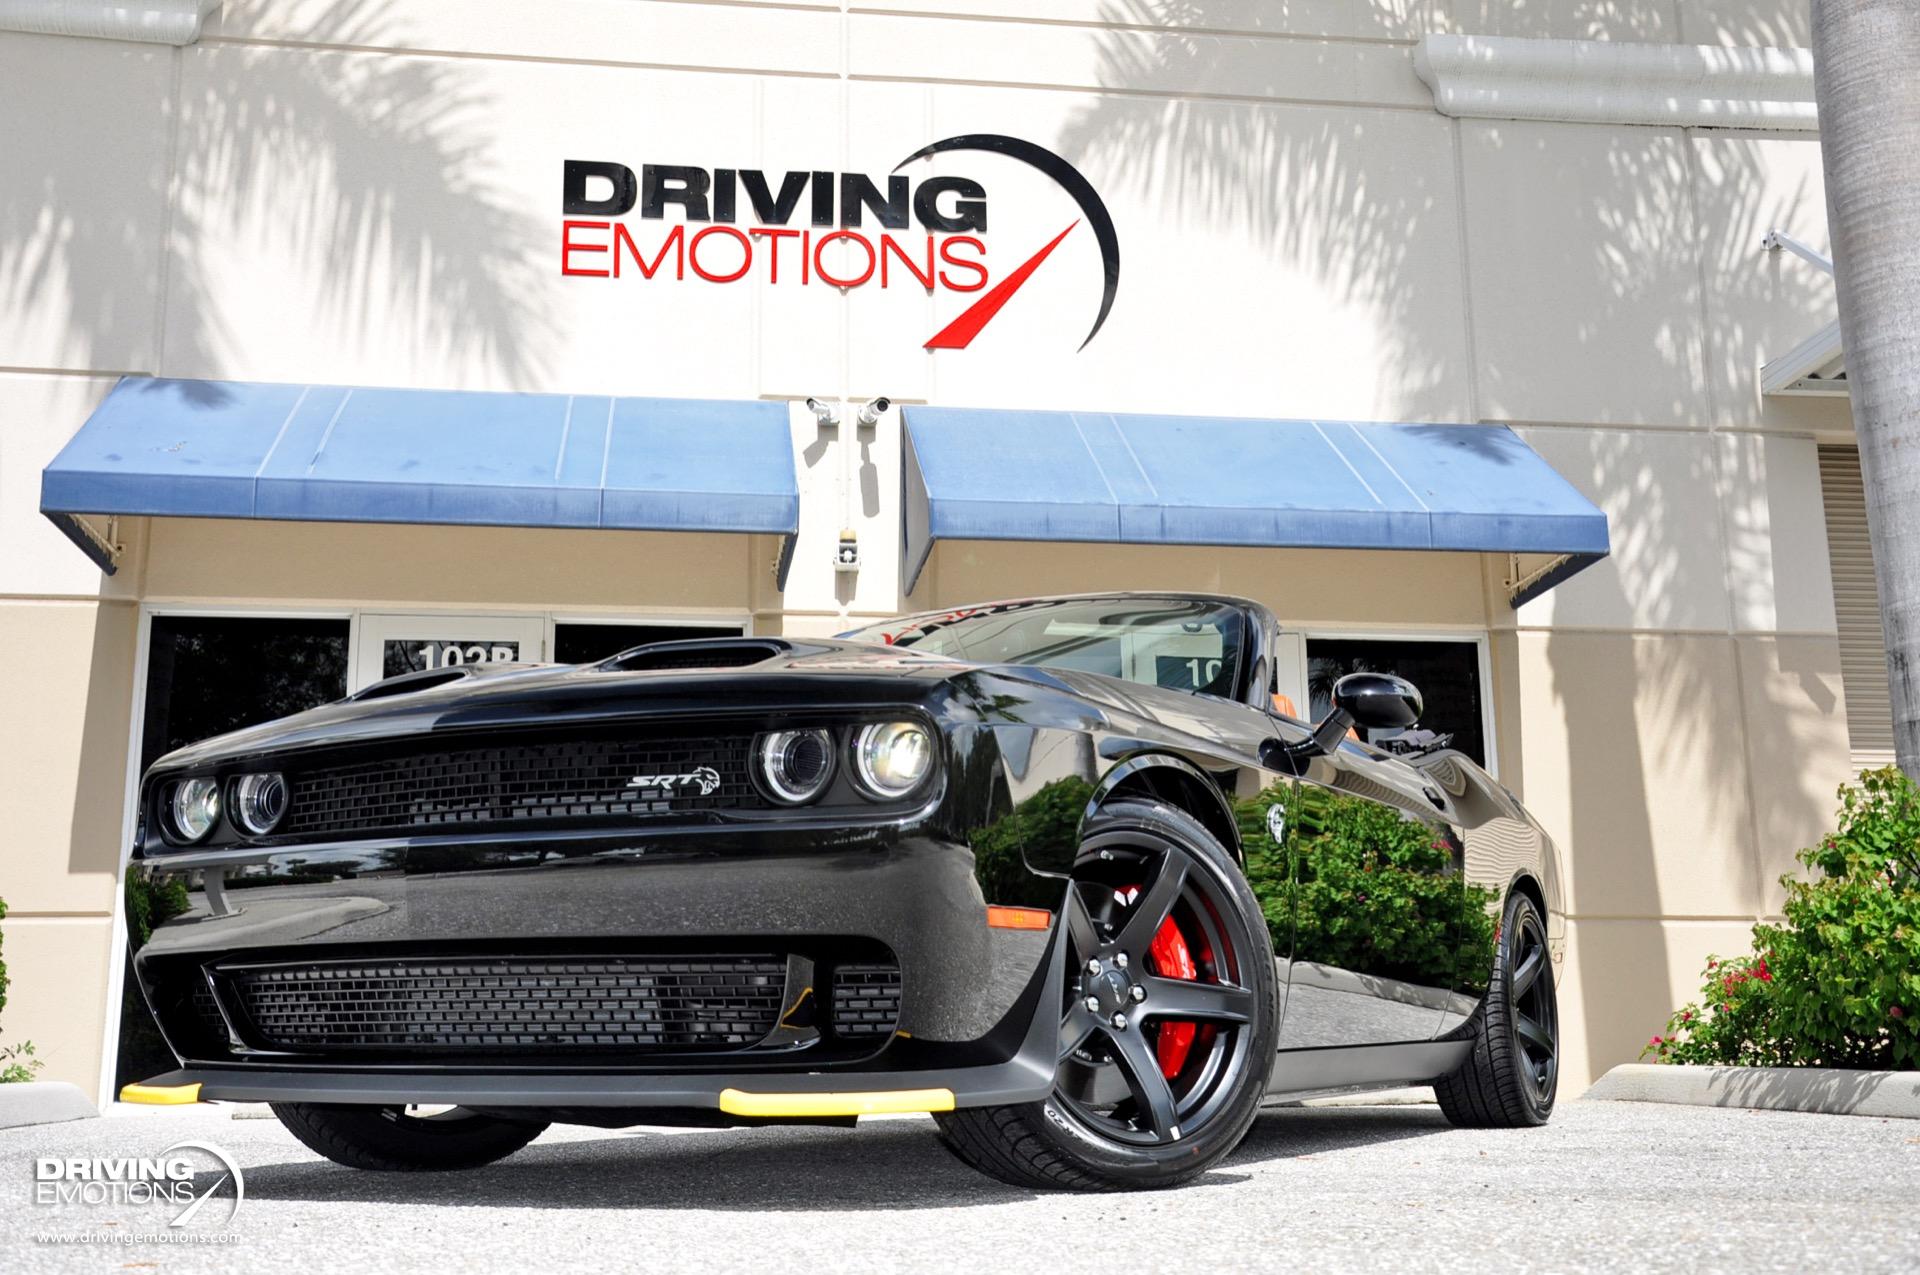 Used 2022 Dodge Challenger SRT Hellcat Convertible by Drop Top Customs! LAGUNA LEATHER! PLUS PACKAGE!  | Lake Park, FL